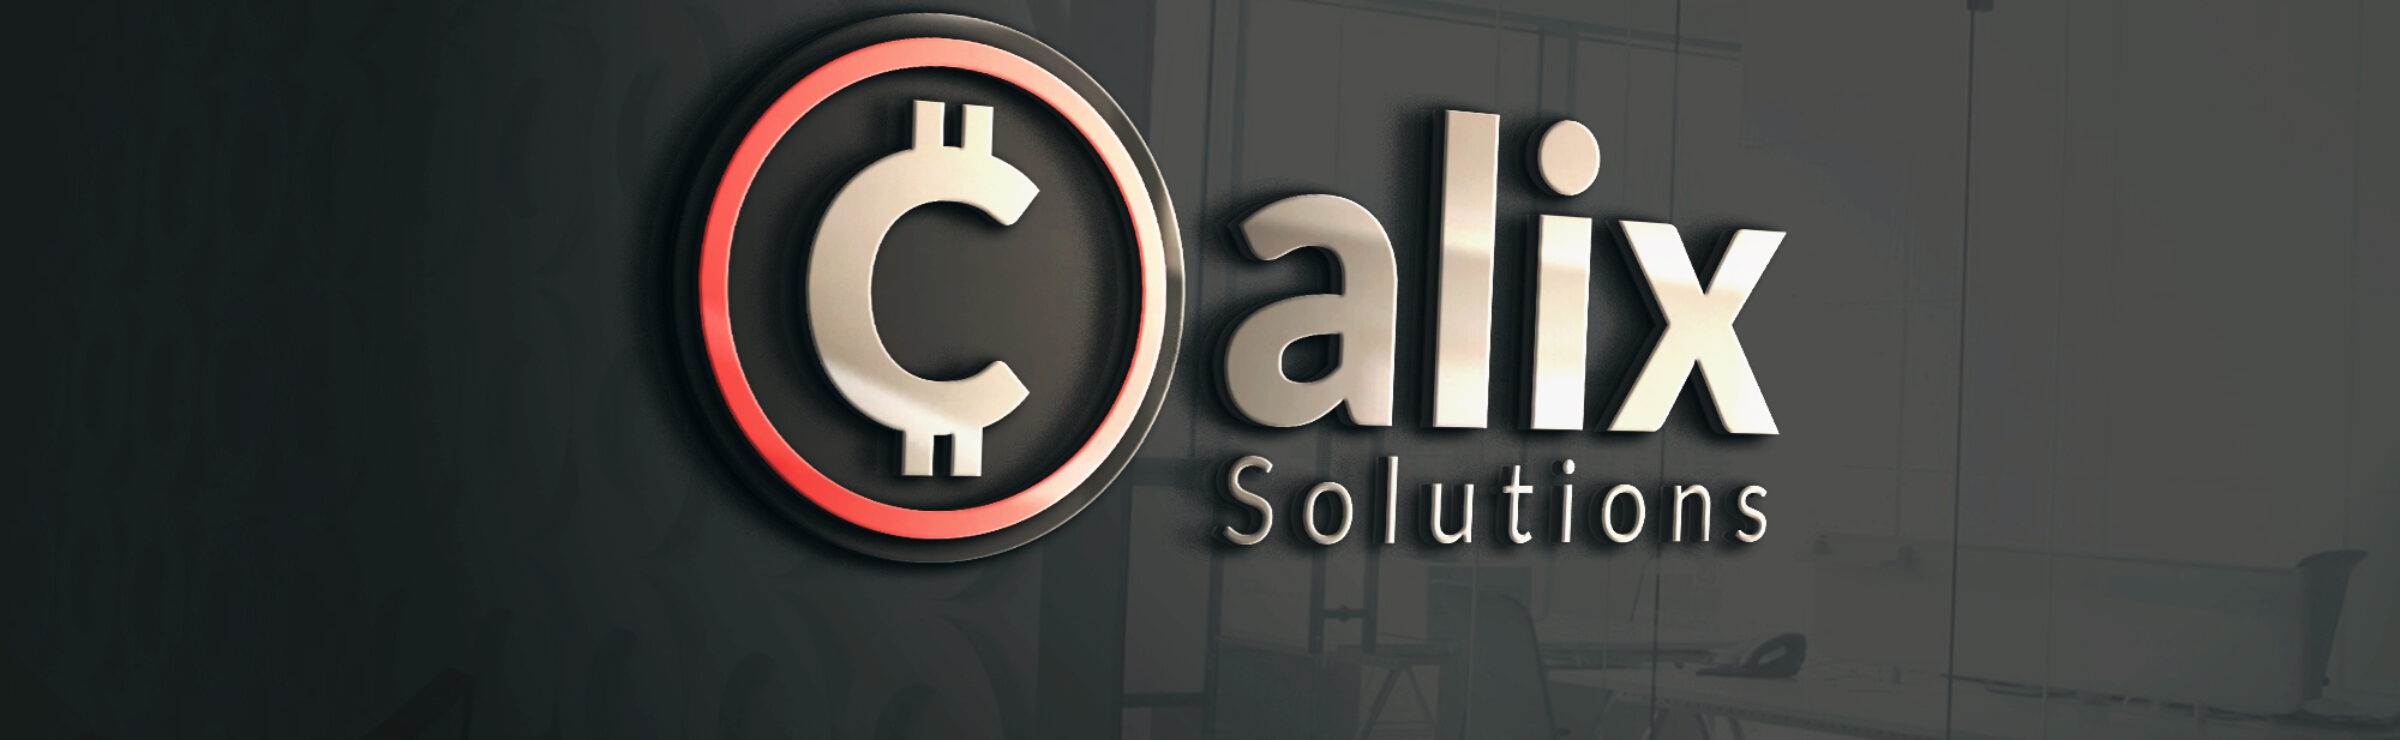 Calix Solutions coupon codes, promo codes and deals